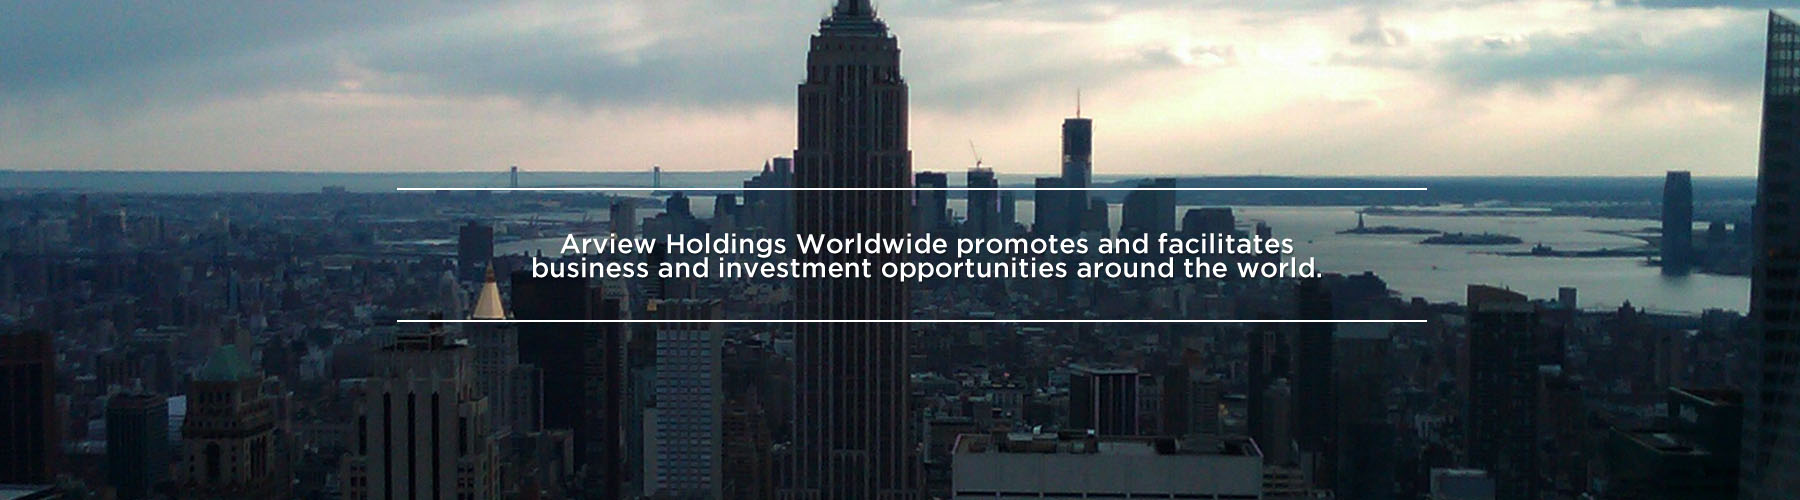 Arview Holdings Worldwide